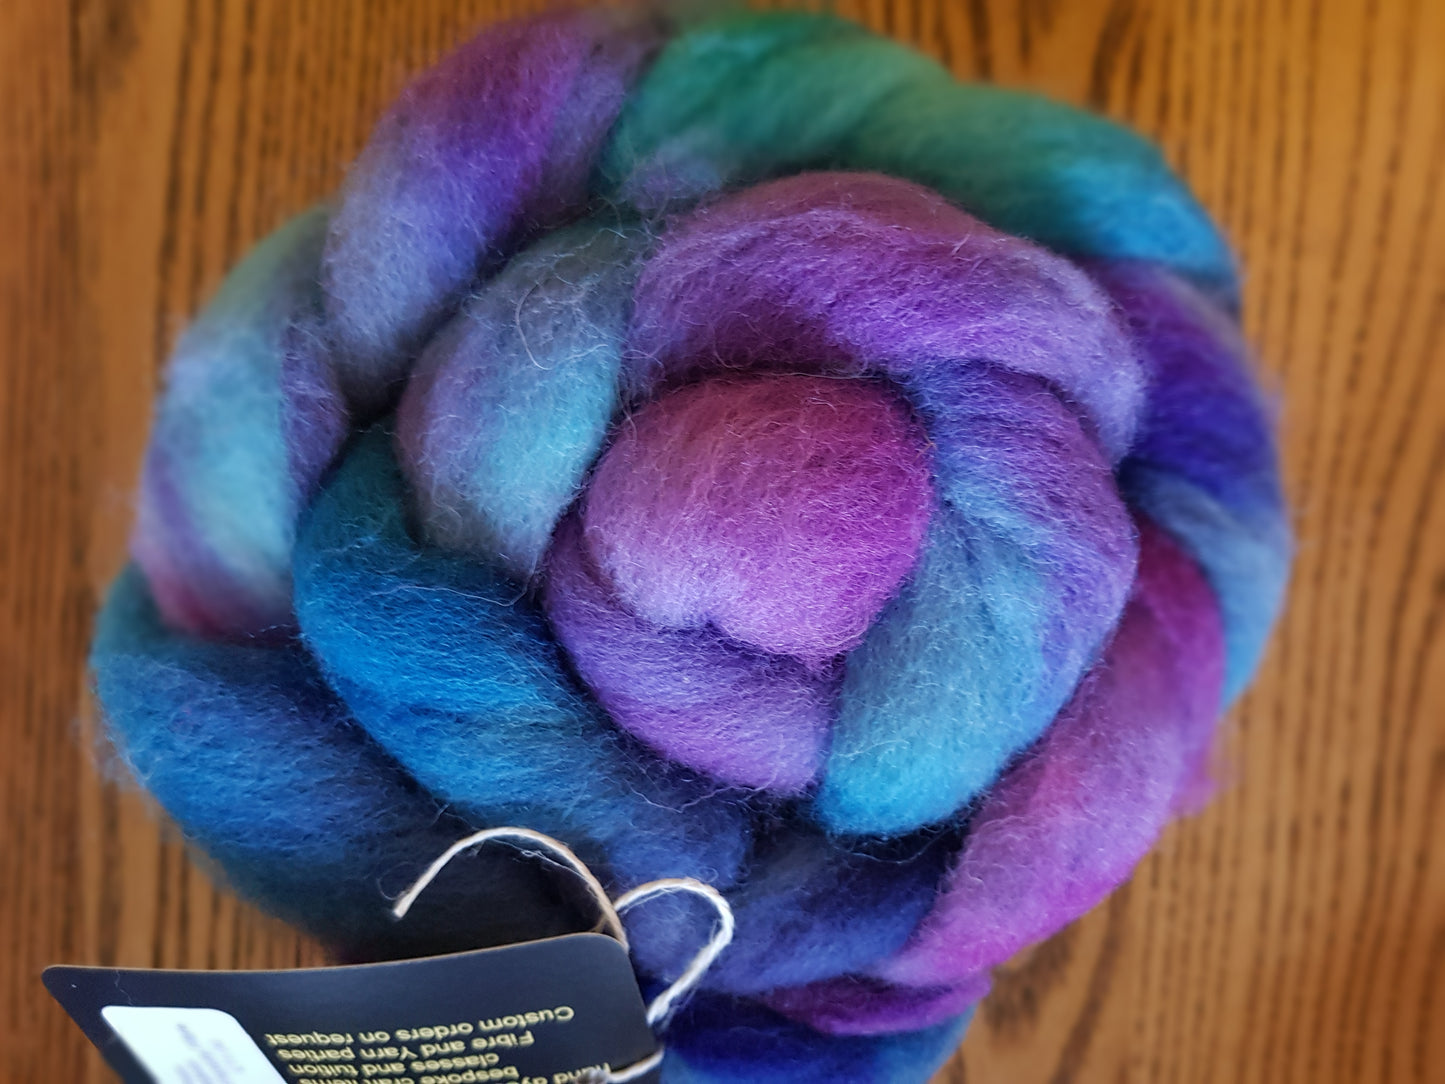 100G Radnor hand dyed fibre combed top - "Prism"